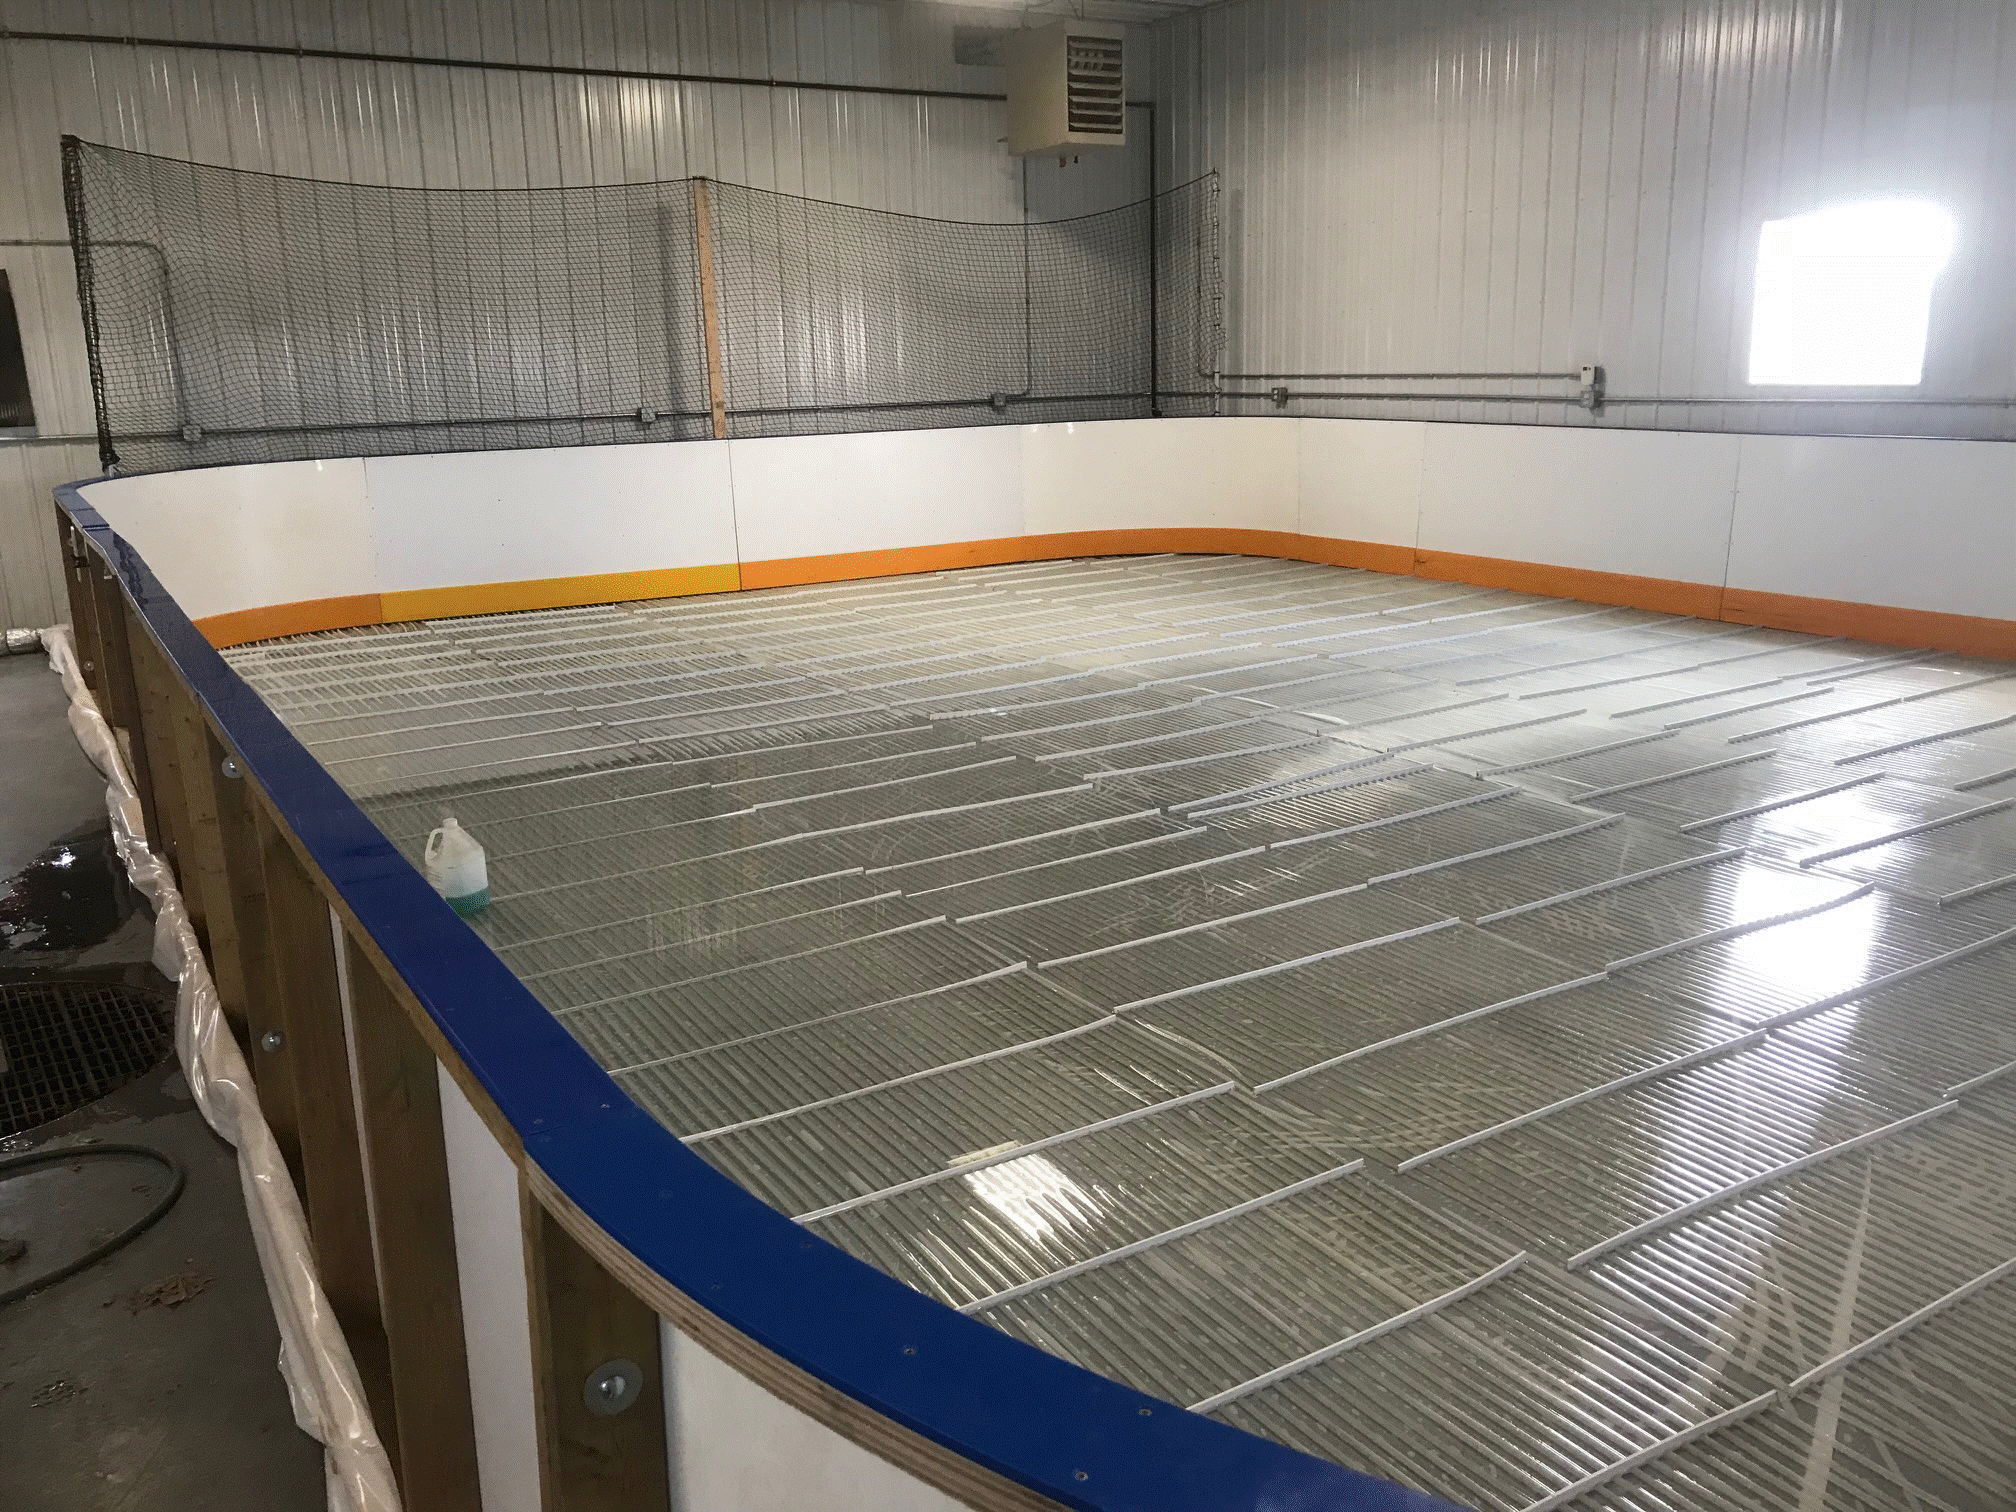 Training rink installed in a barn